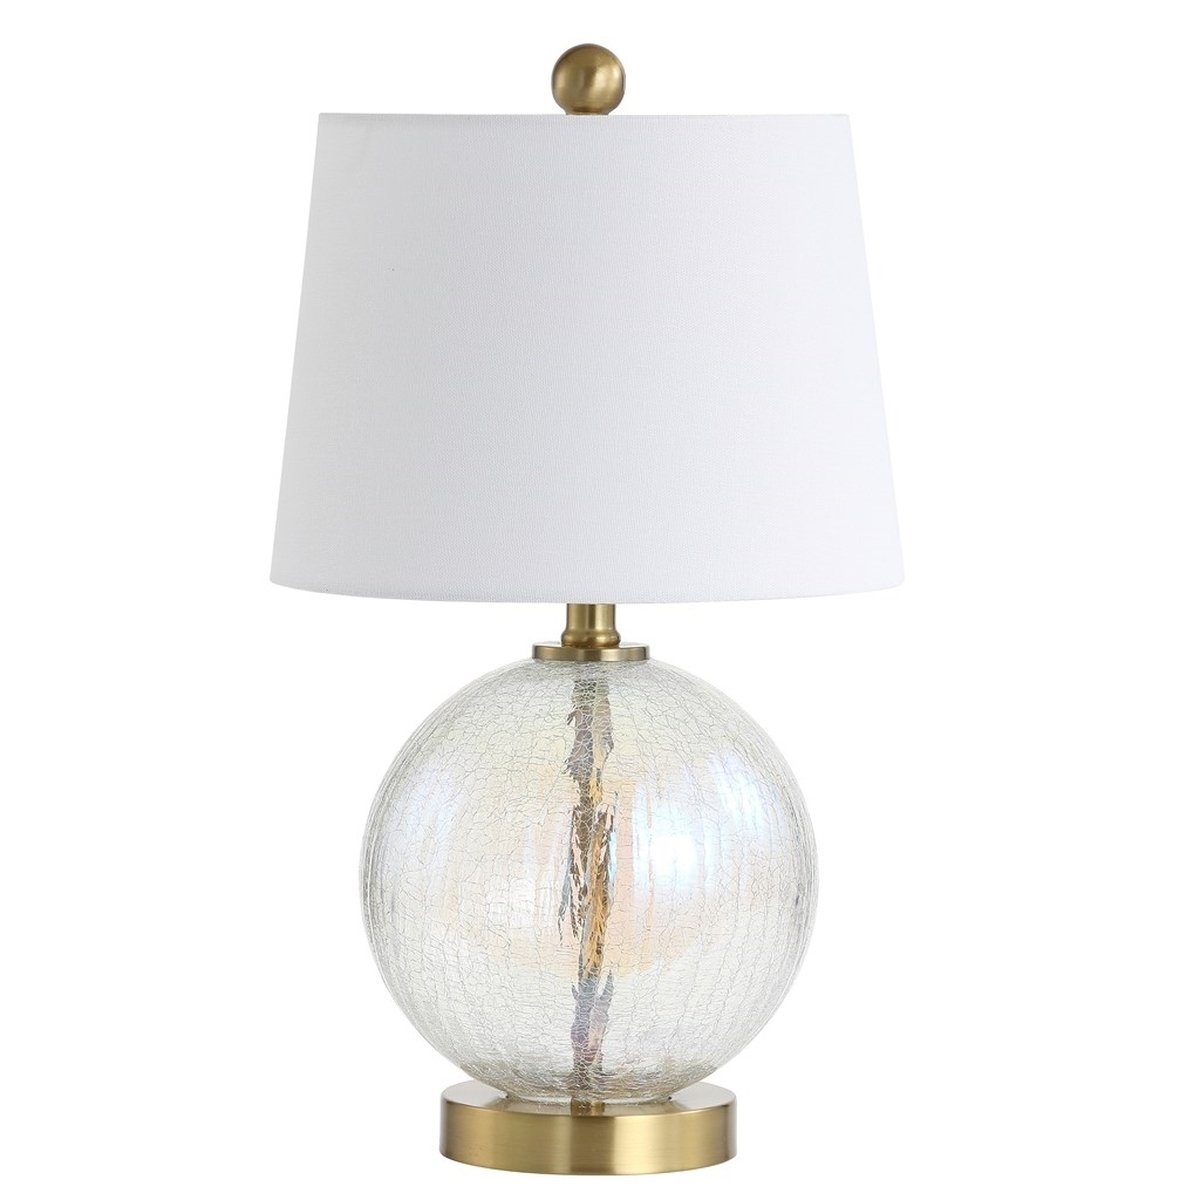 Riglan Table Lamp - Clear/Gold - Arlo Home - Image 0